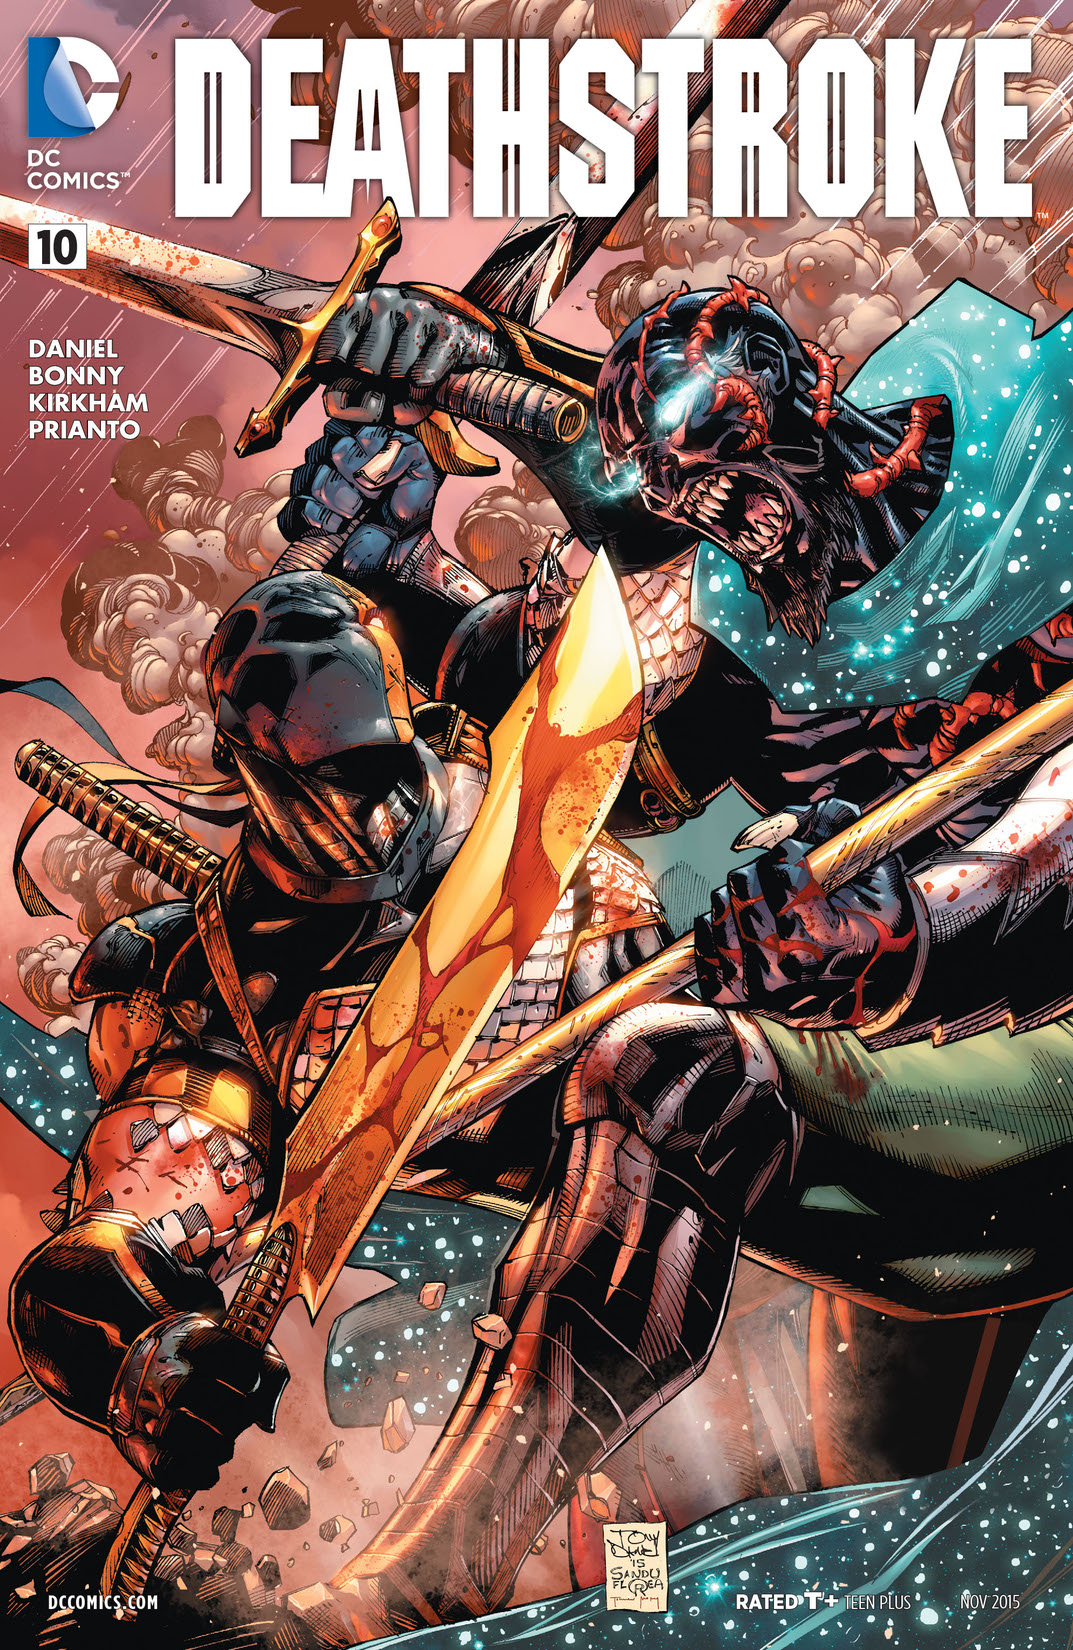 Deathstroke (2014-) #10 preview images